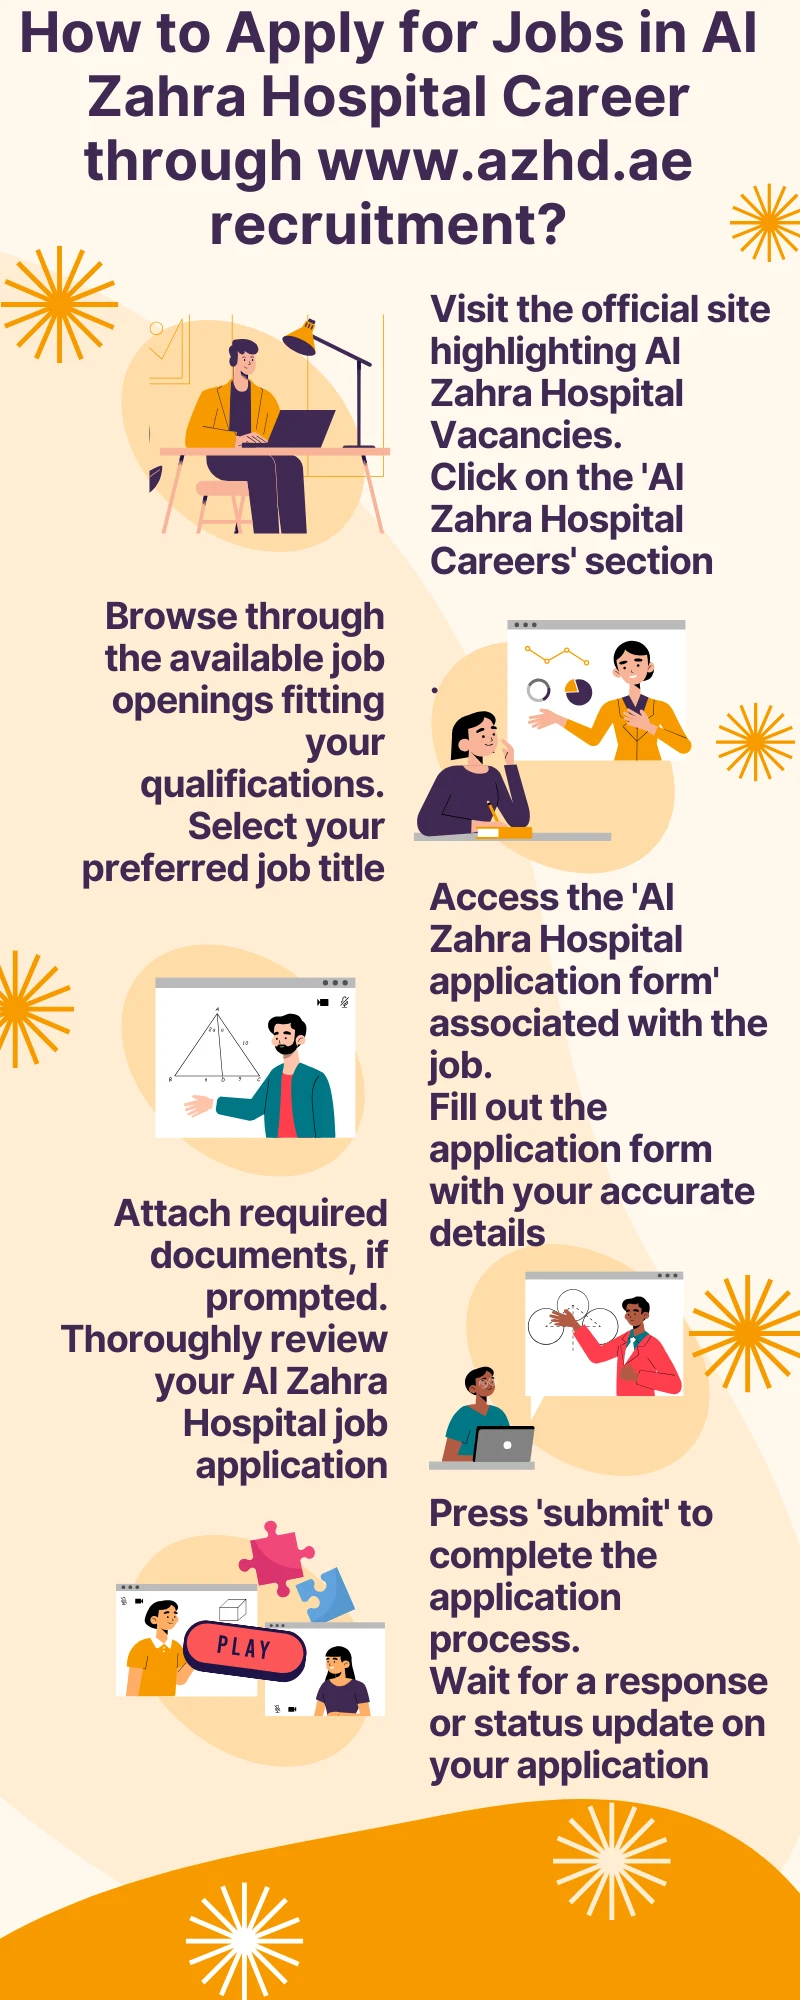 How to Apply for Jobs in Al Zahra Hospital Career through www.azhd.ae recruitment?